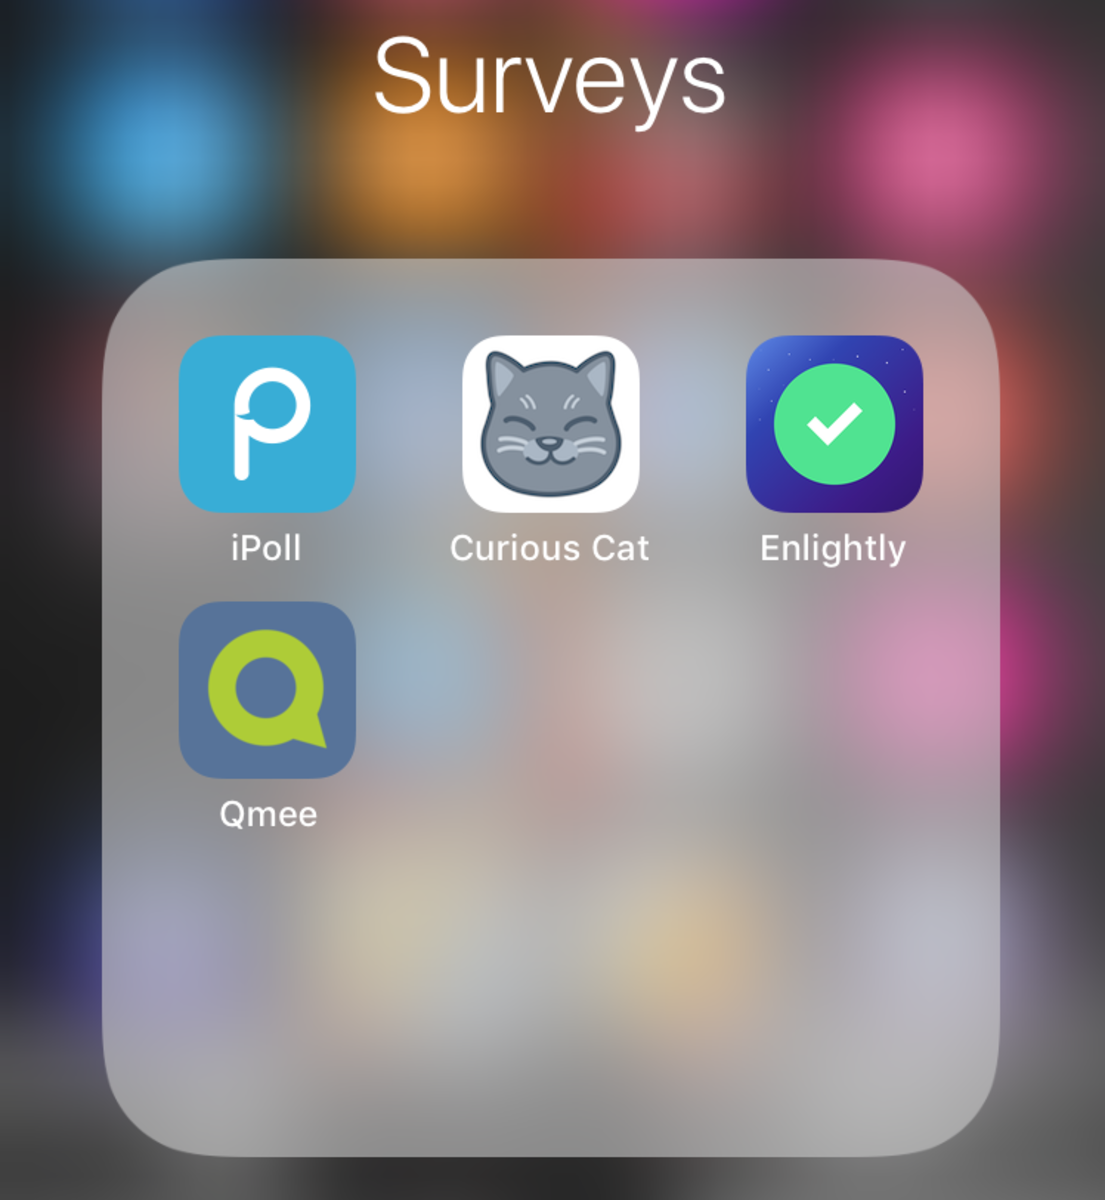 The four apps I will review: iPoll, Curious Cat, Enlightly, and Qmee